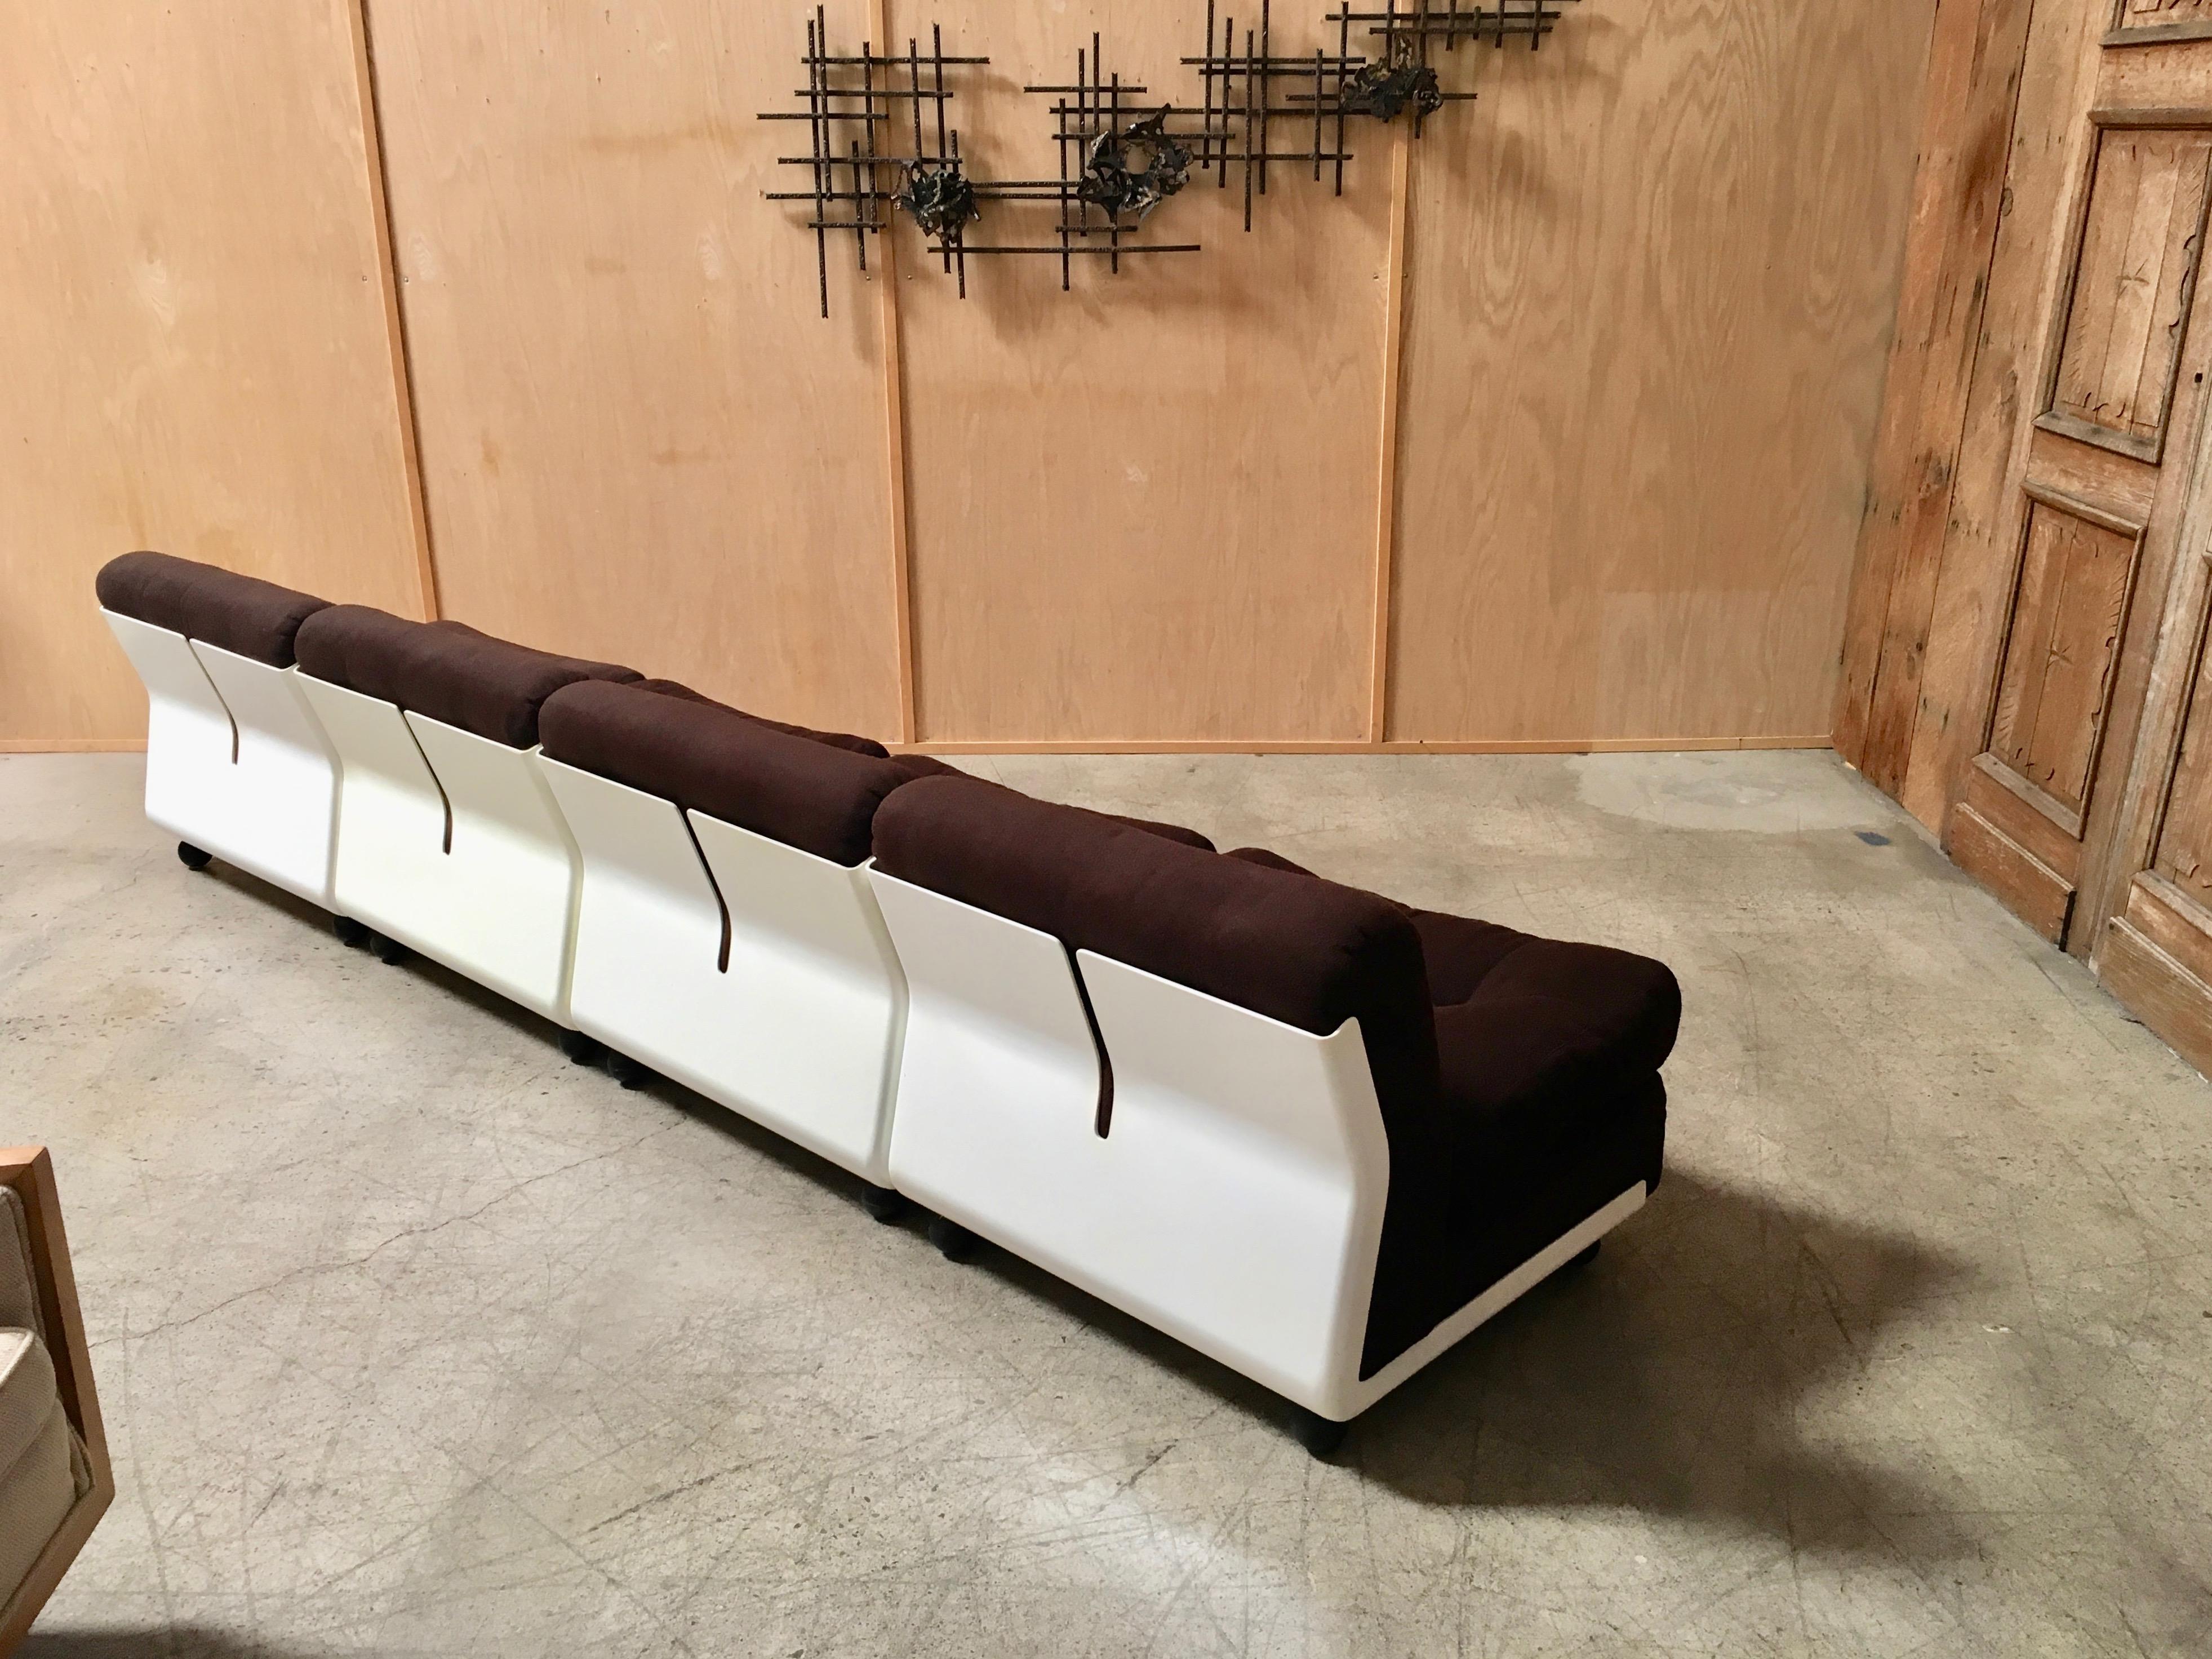 The shells are white fiberglass with chocolate brown fabric cushions that are very comfortable these can be used as lounge chairs, love seats or a large sofa great Italian design.